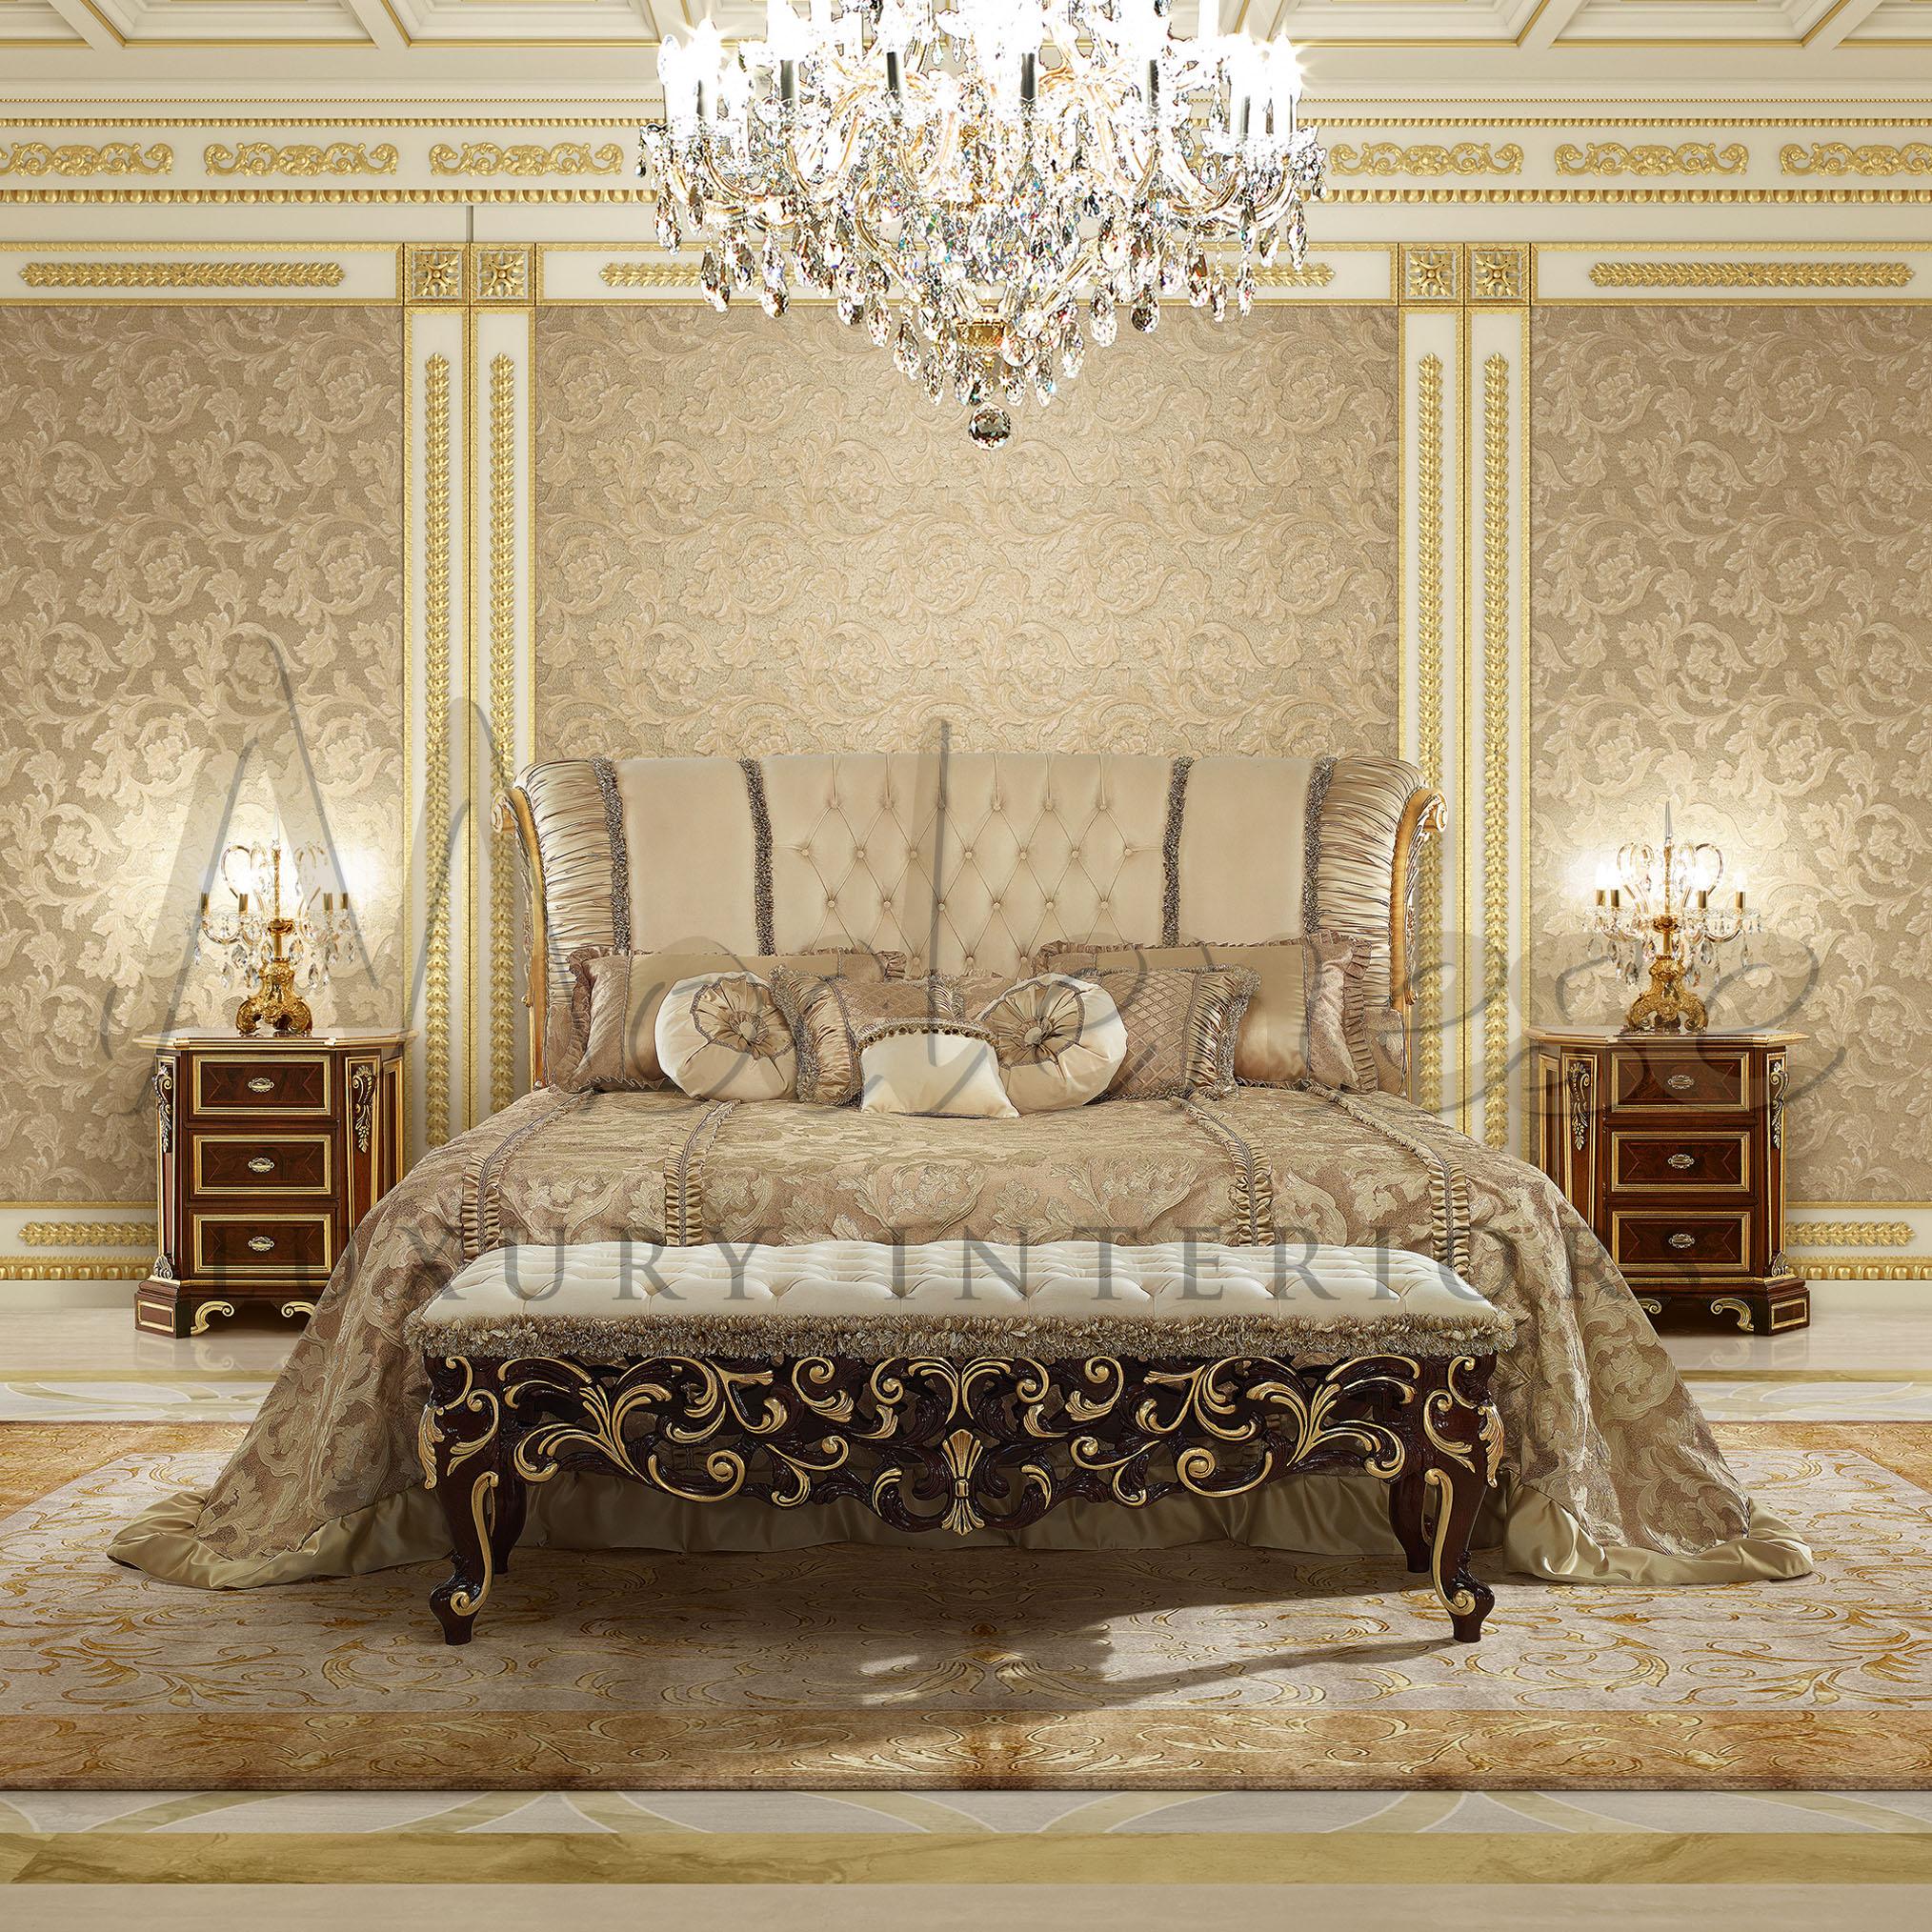 A lot more than just a normal bedroom solution, this neo-rococo upholstered double bed by Modenese Gastone Interiors will make you feel like a queen with her king. Wide spaces, leather tufted upholstery and a wonderfully designed headboard are a